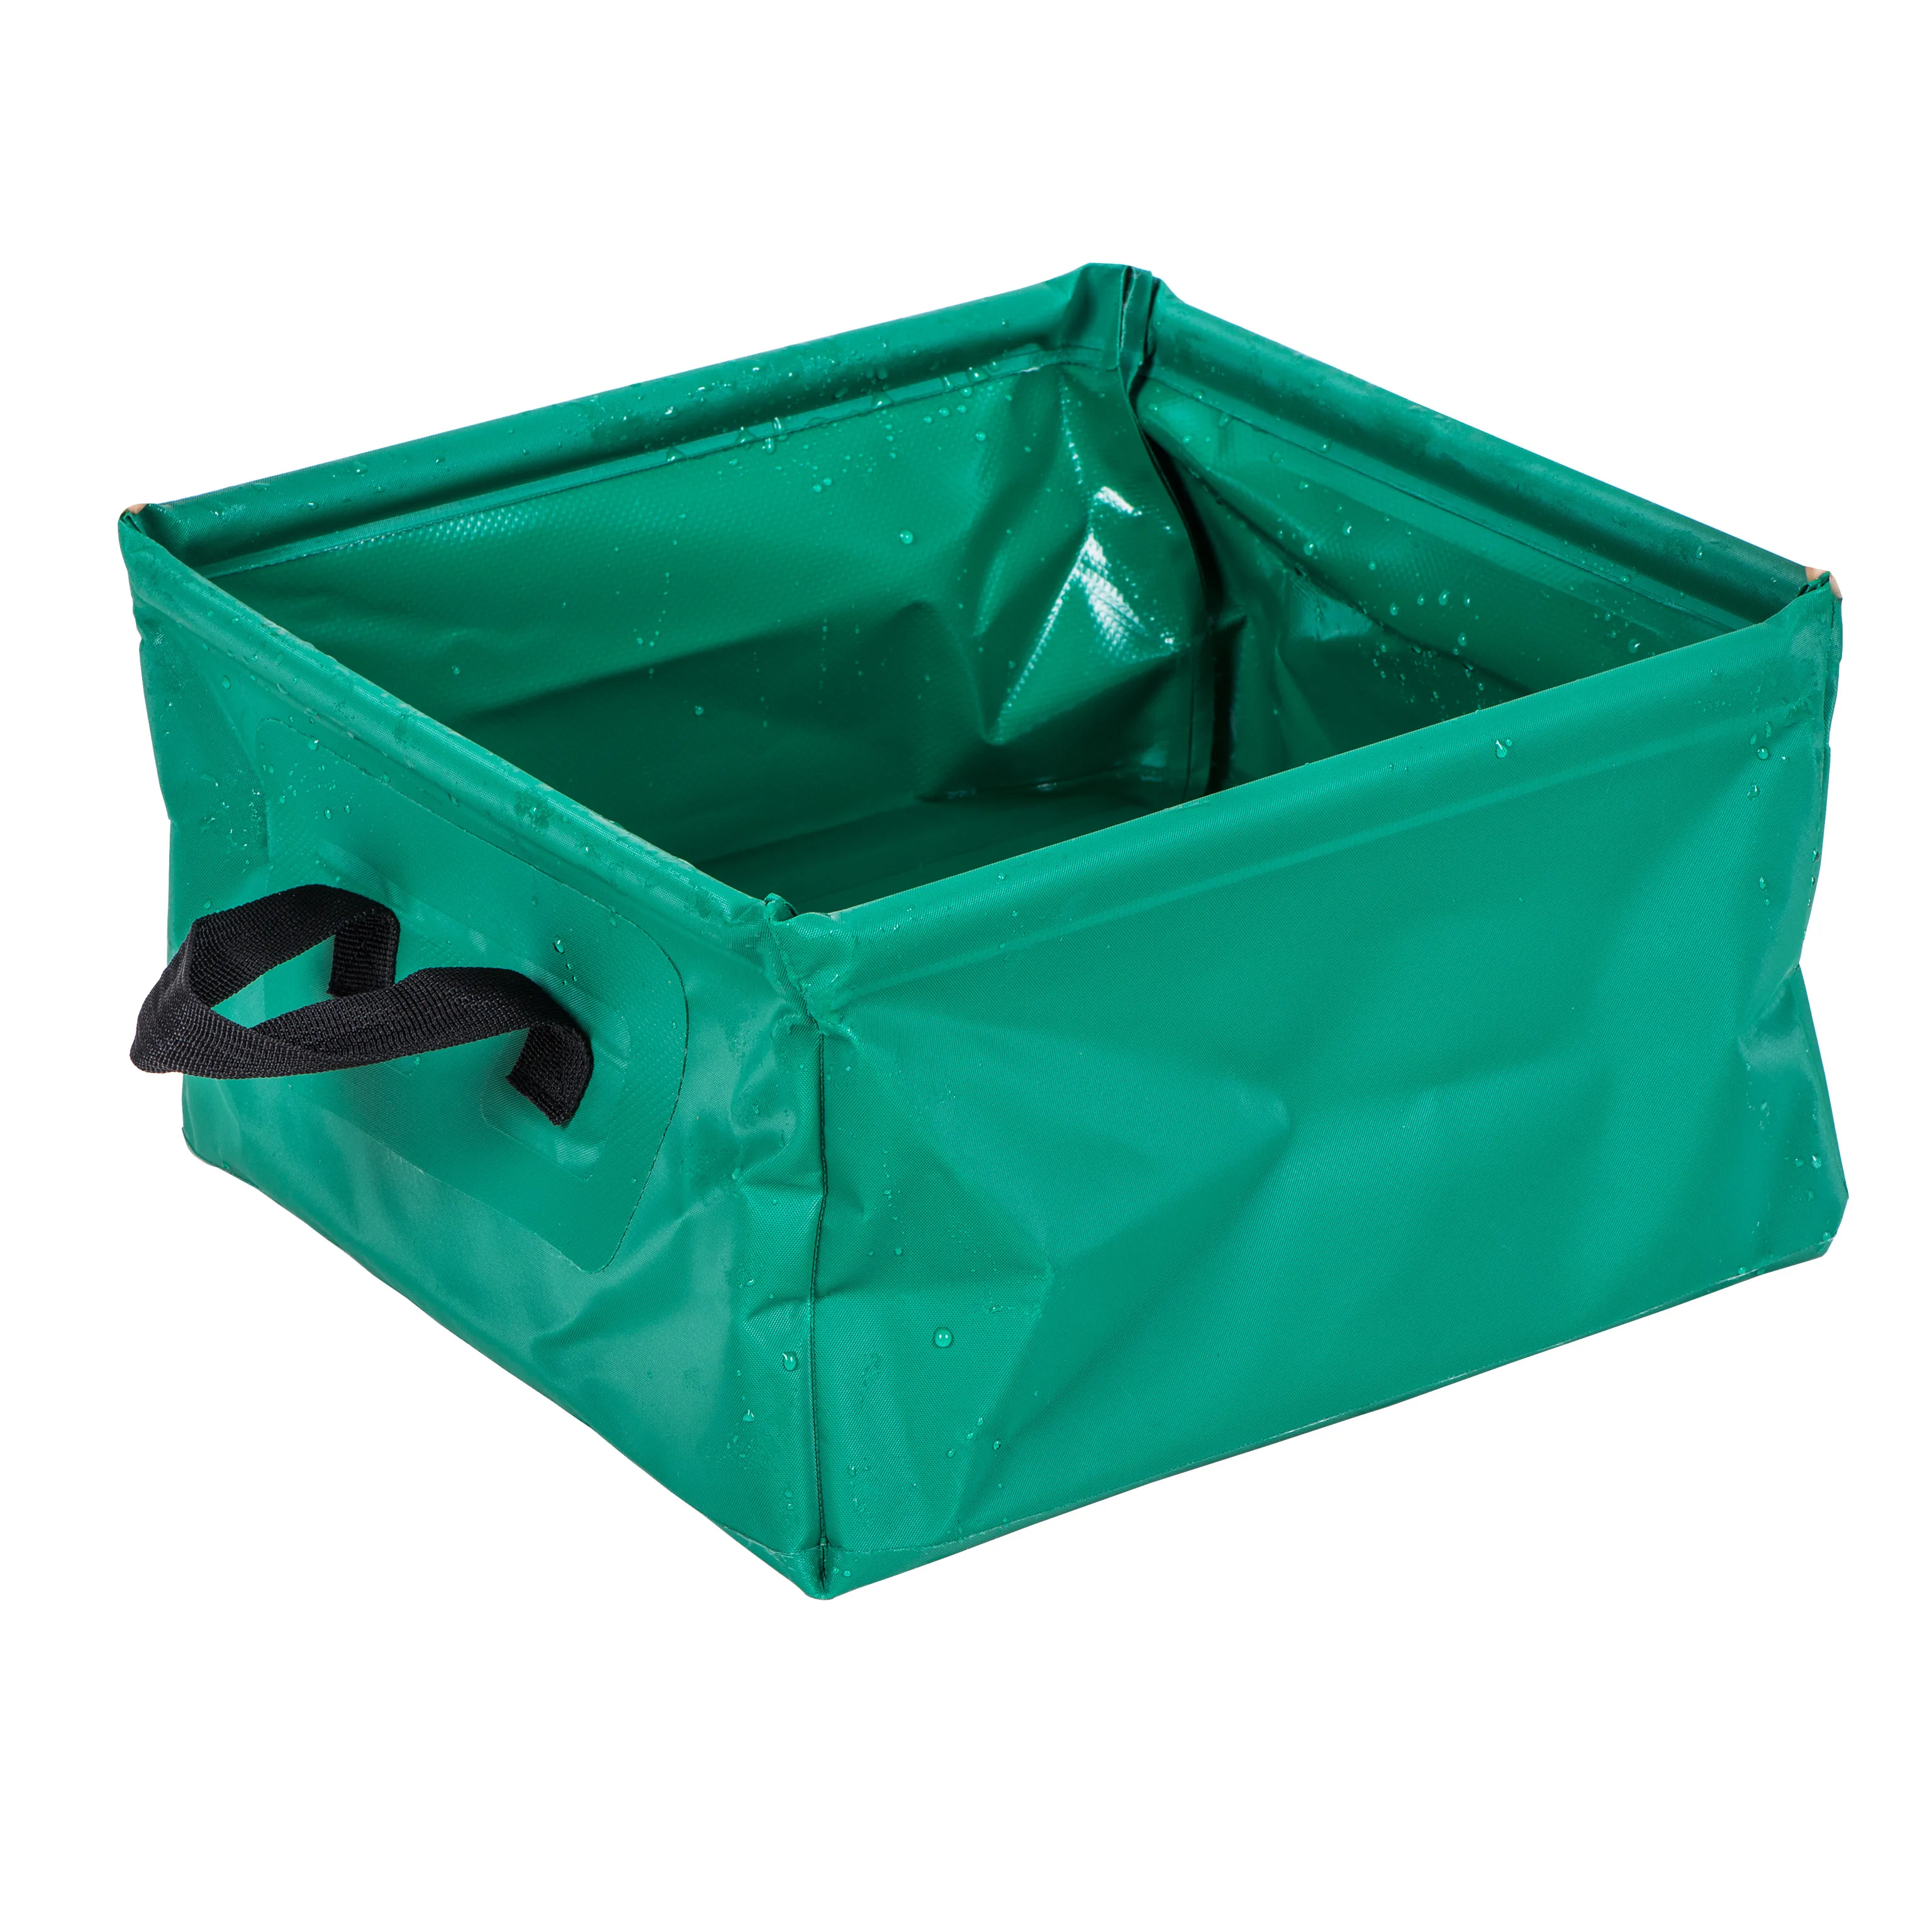 

Collapsible waterproof Bucket Compact Portable Folding Water Container - Lightweight & Durable